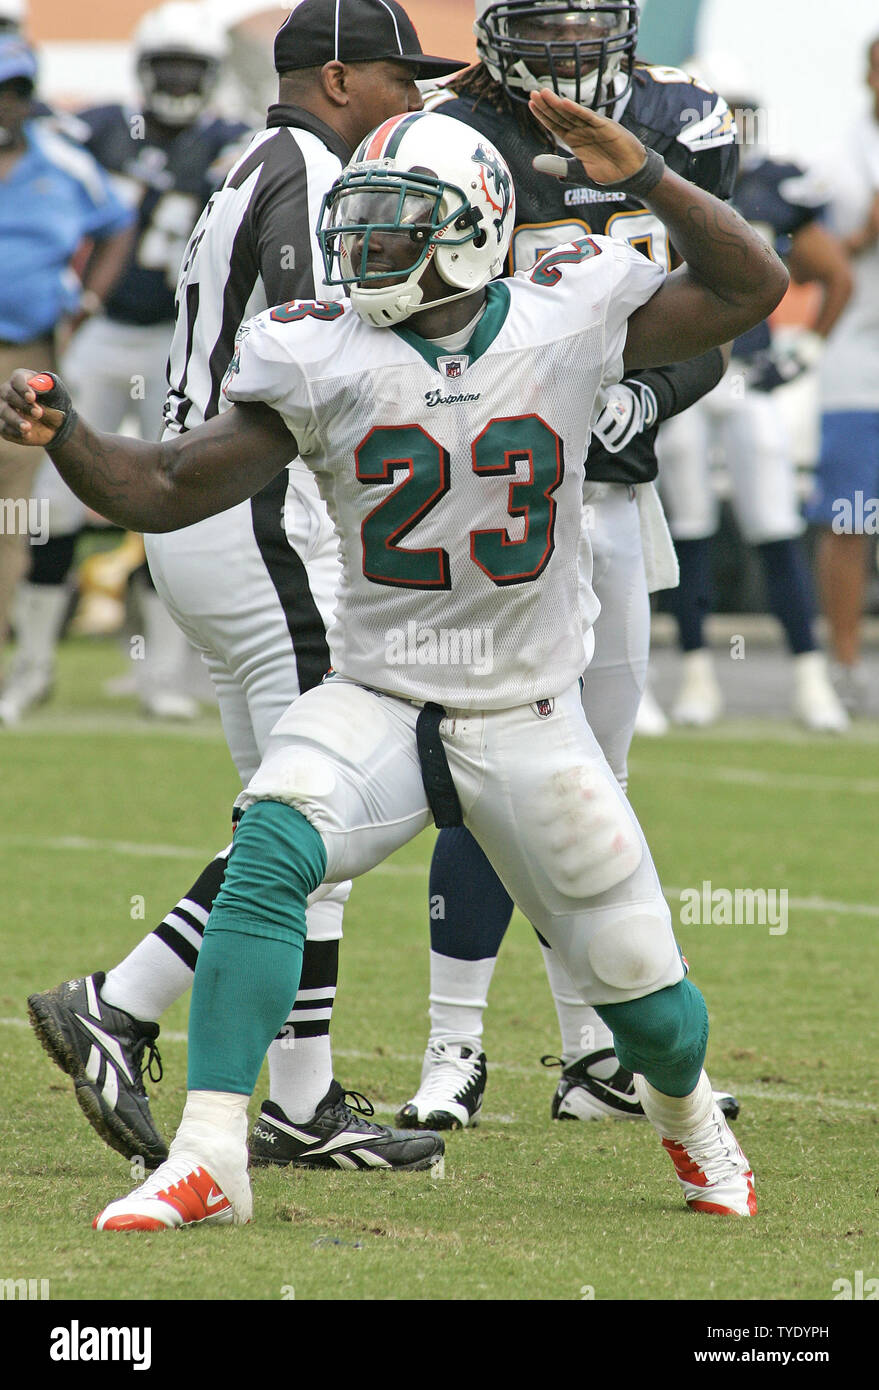 Miami Dolphins running back Ronnie Brown celebrates rushing for a first  down in second quarter action at Dolphin Stadium in Miami on October 5,  2008. The Dolphins defeated the Chargers 17-10. (UPI